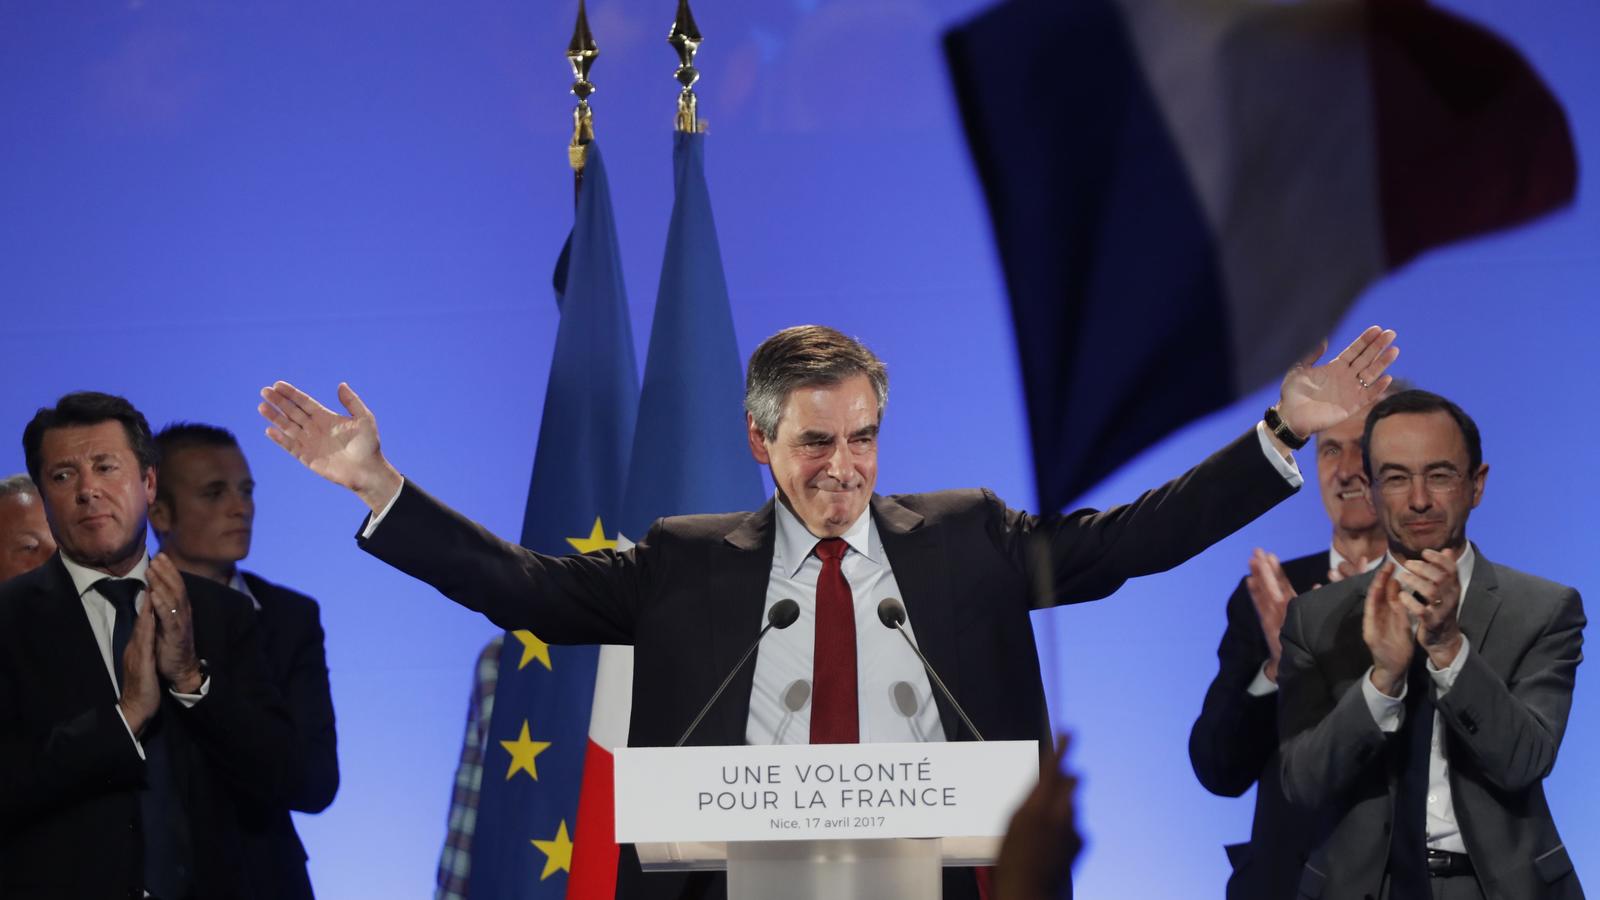 Francois Fillon, former French Prime Minister, member of the Republicans political party and 2017 French presidential election candidate of the French centre-right, reacts as he attends a political campaign rally in Nice, France, April 17, 2017. REUT